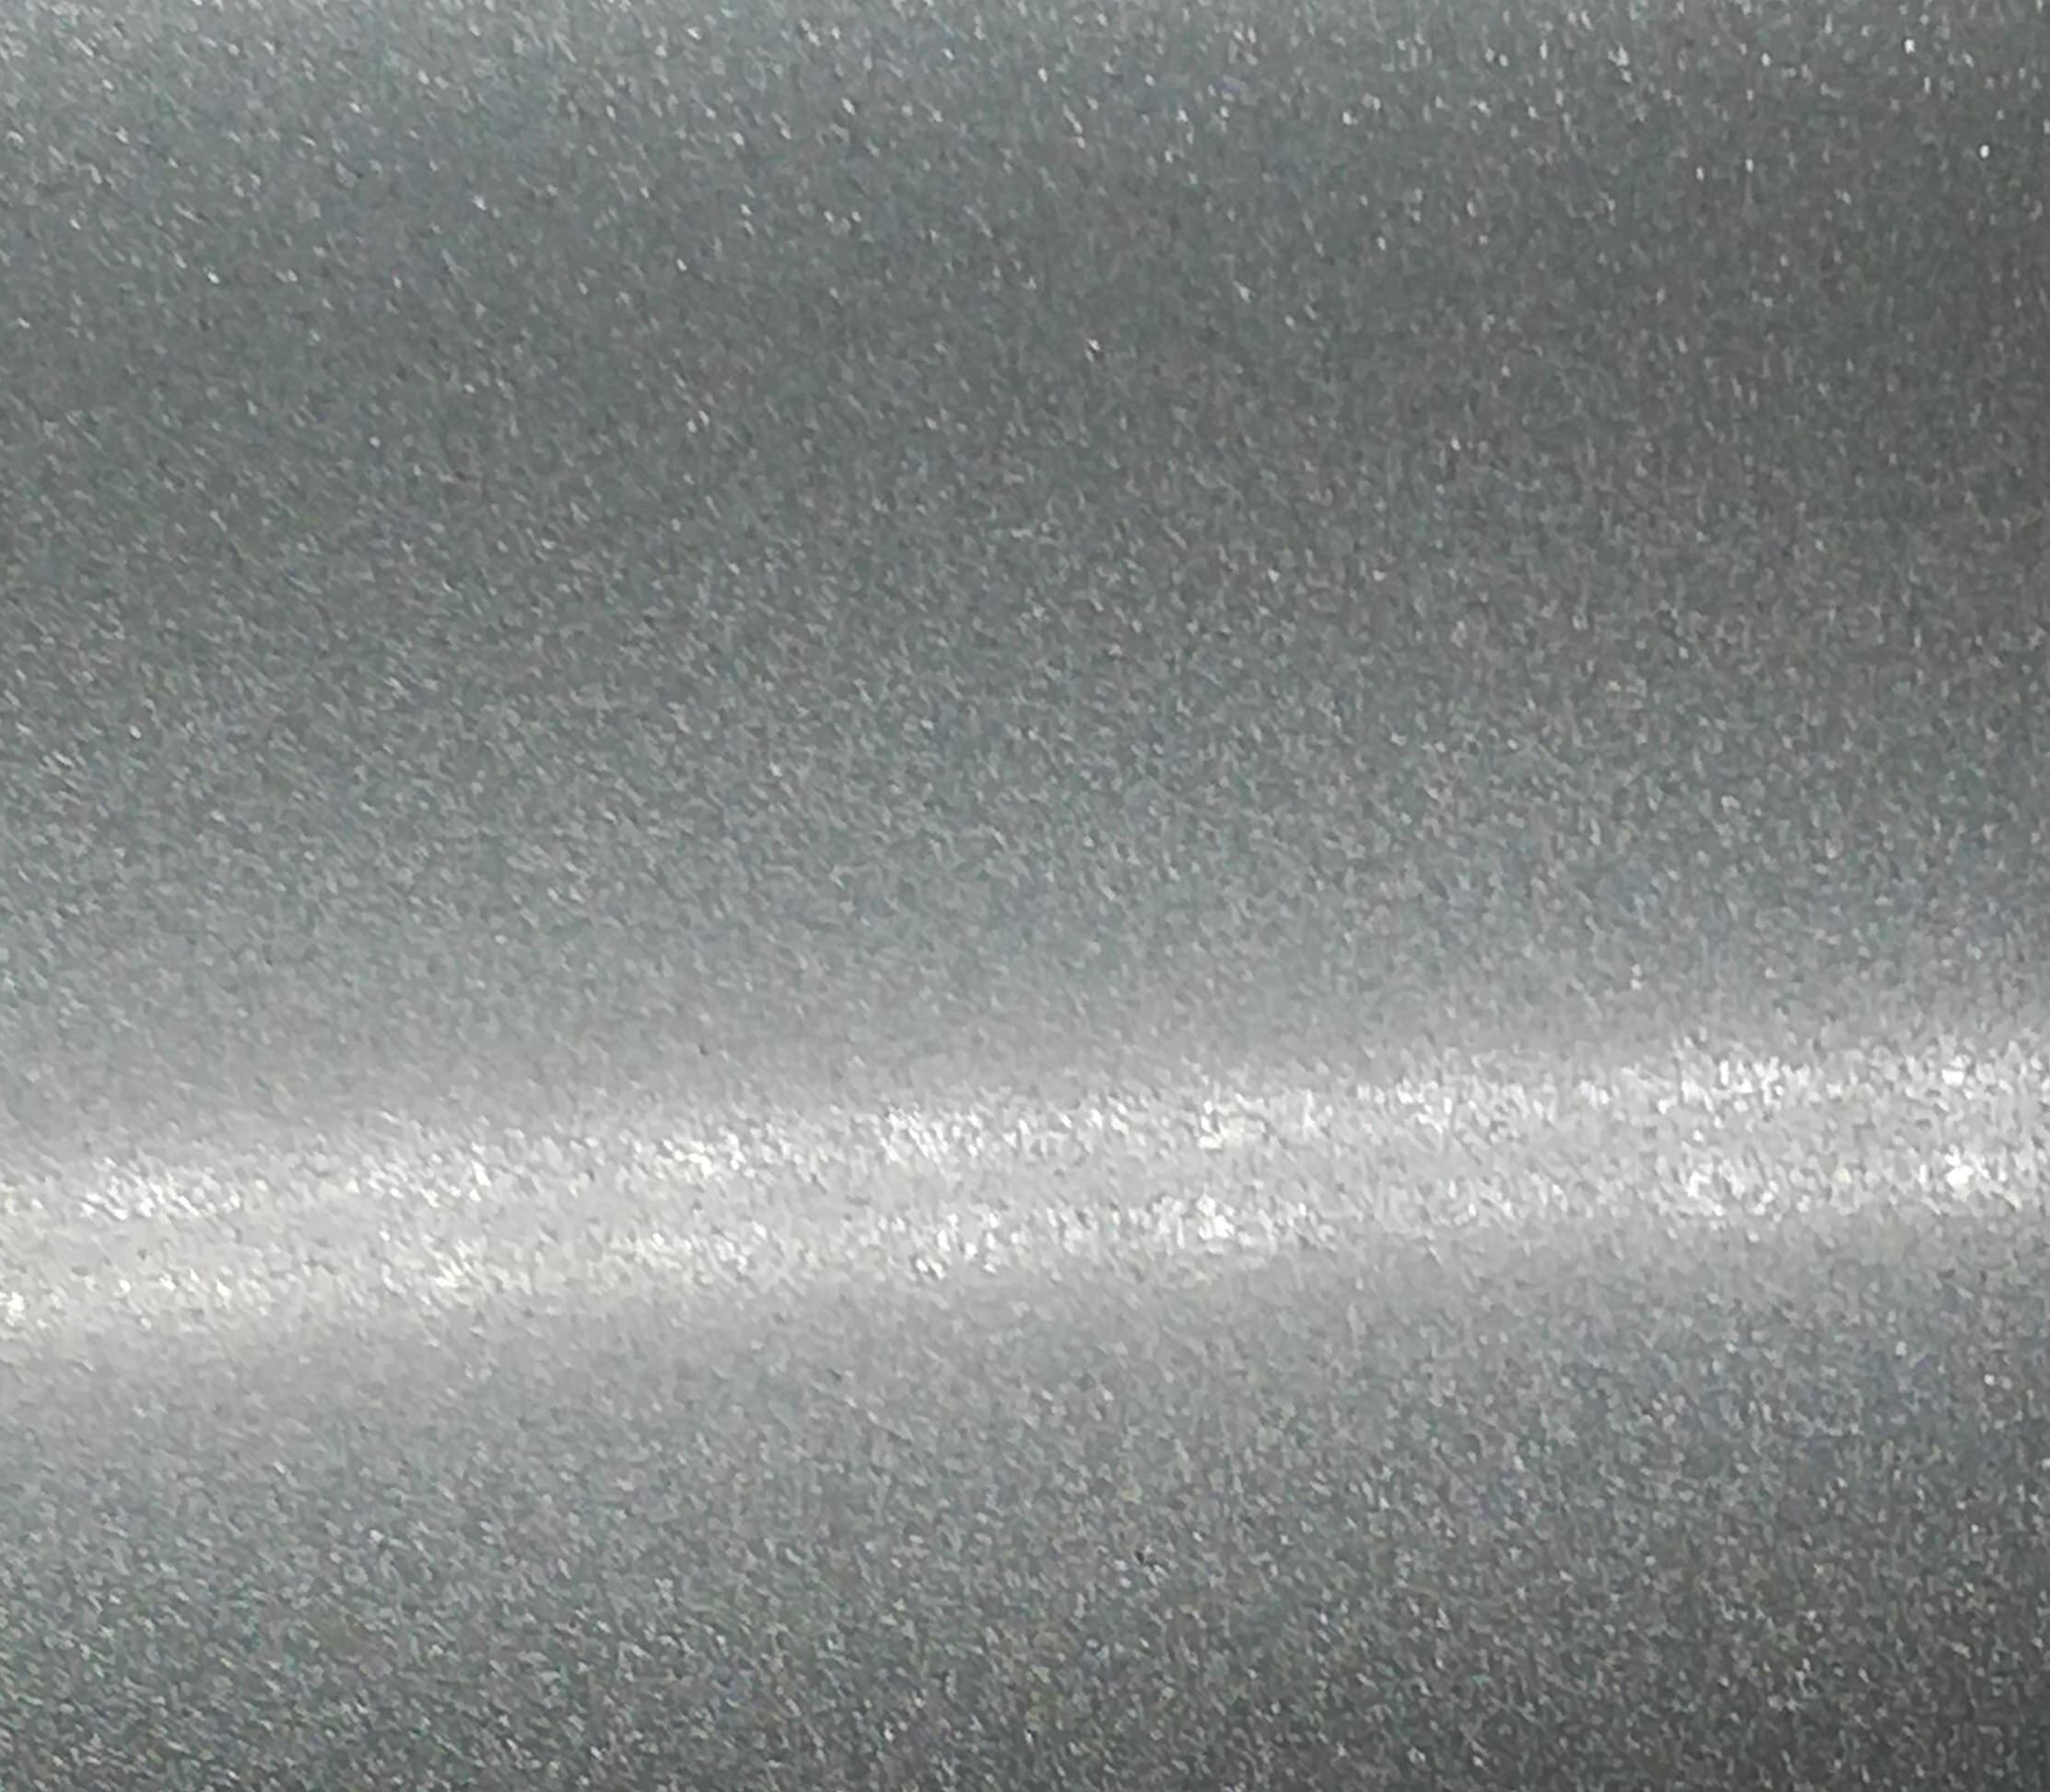 SAND BLASTED STAINLESS STEEL SHEETS